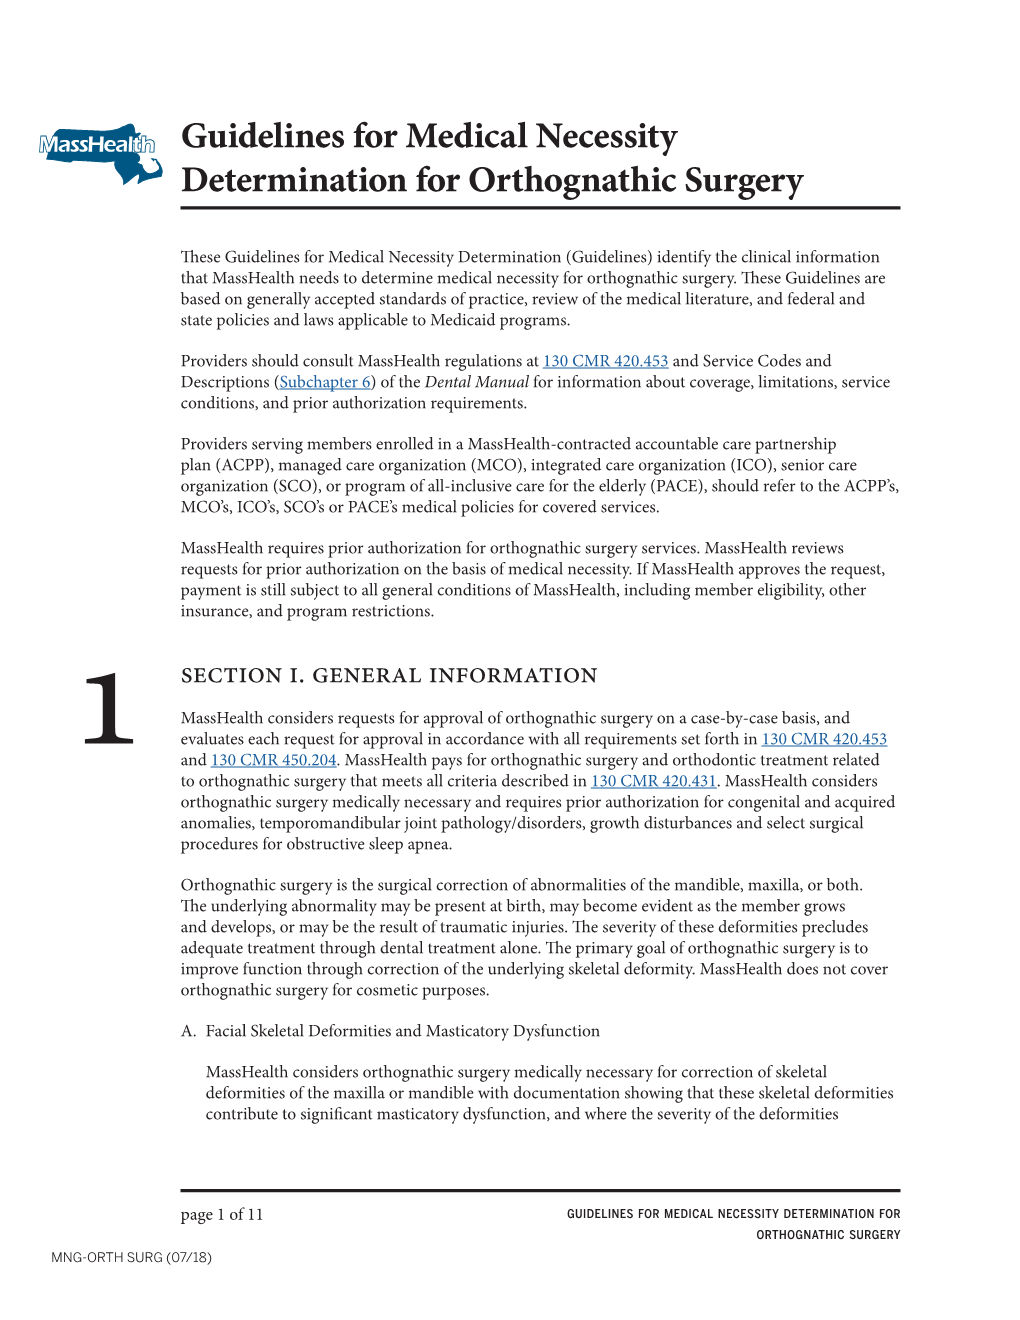 Guidelines for Medical Necessity Determination for Orthognathic Surgery